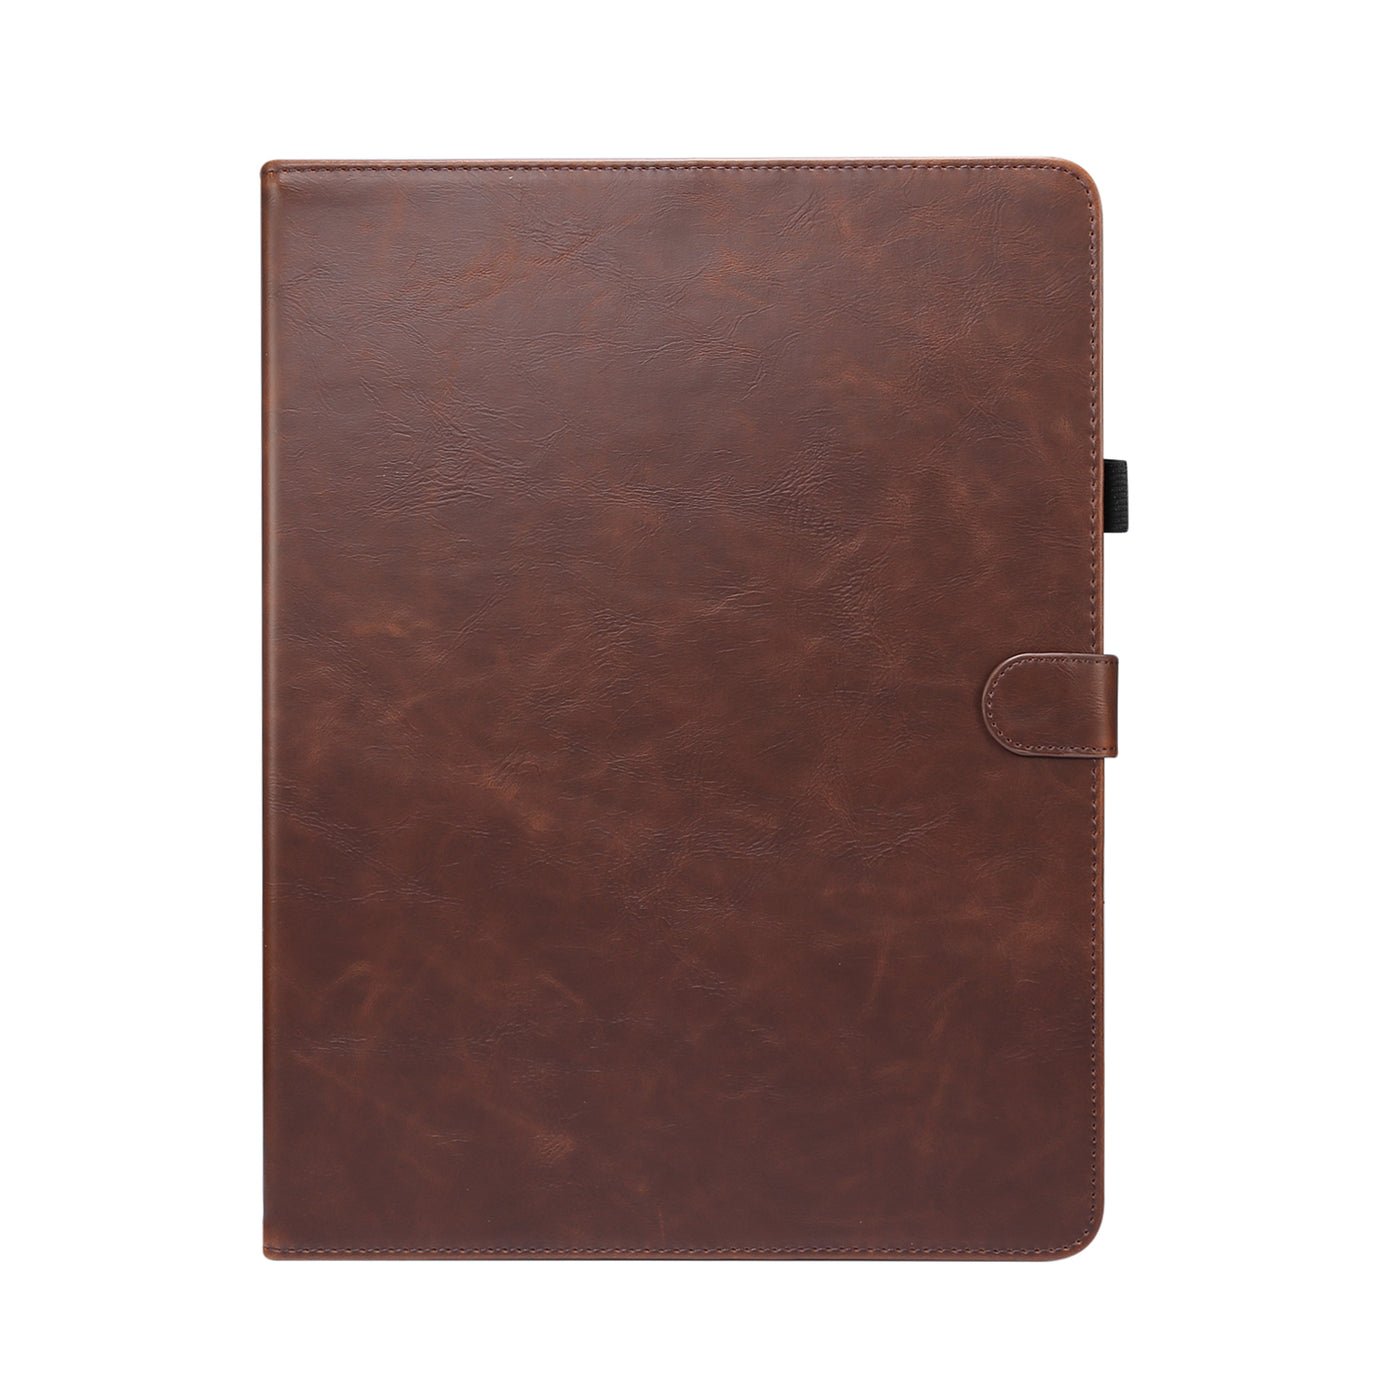 Apple iPad Pro 11 inch (2nd Gen) coffee color leather wallet flip cover case By excelsior